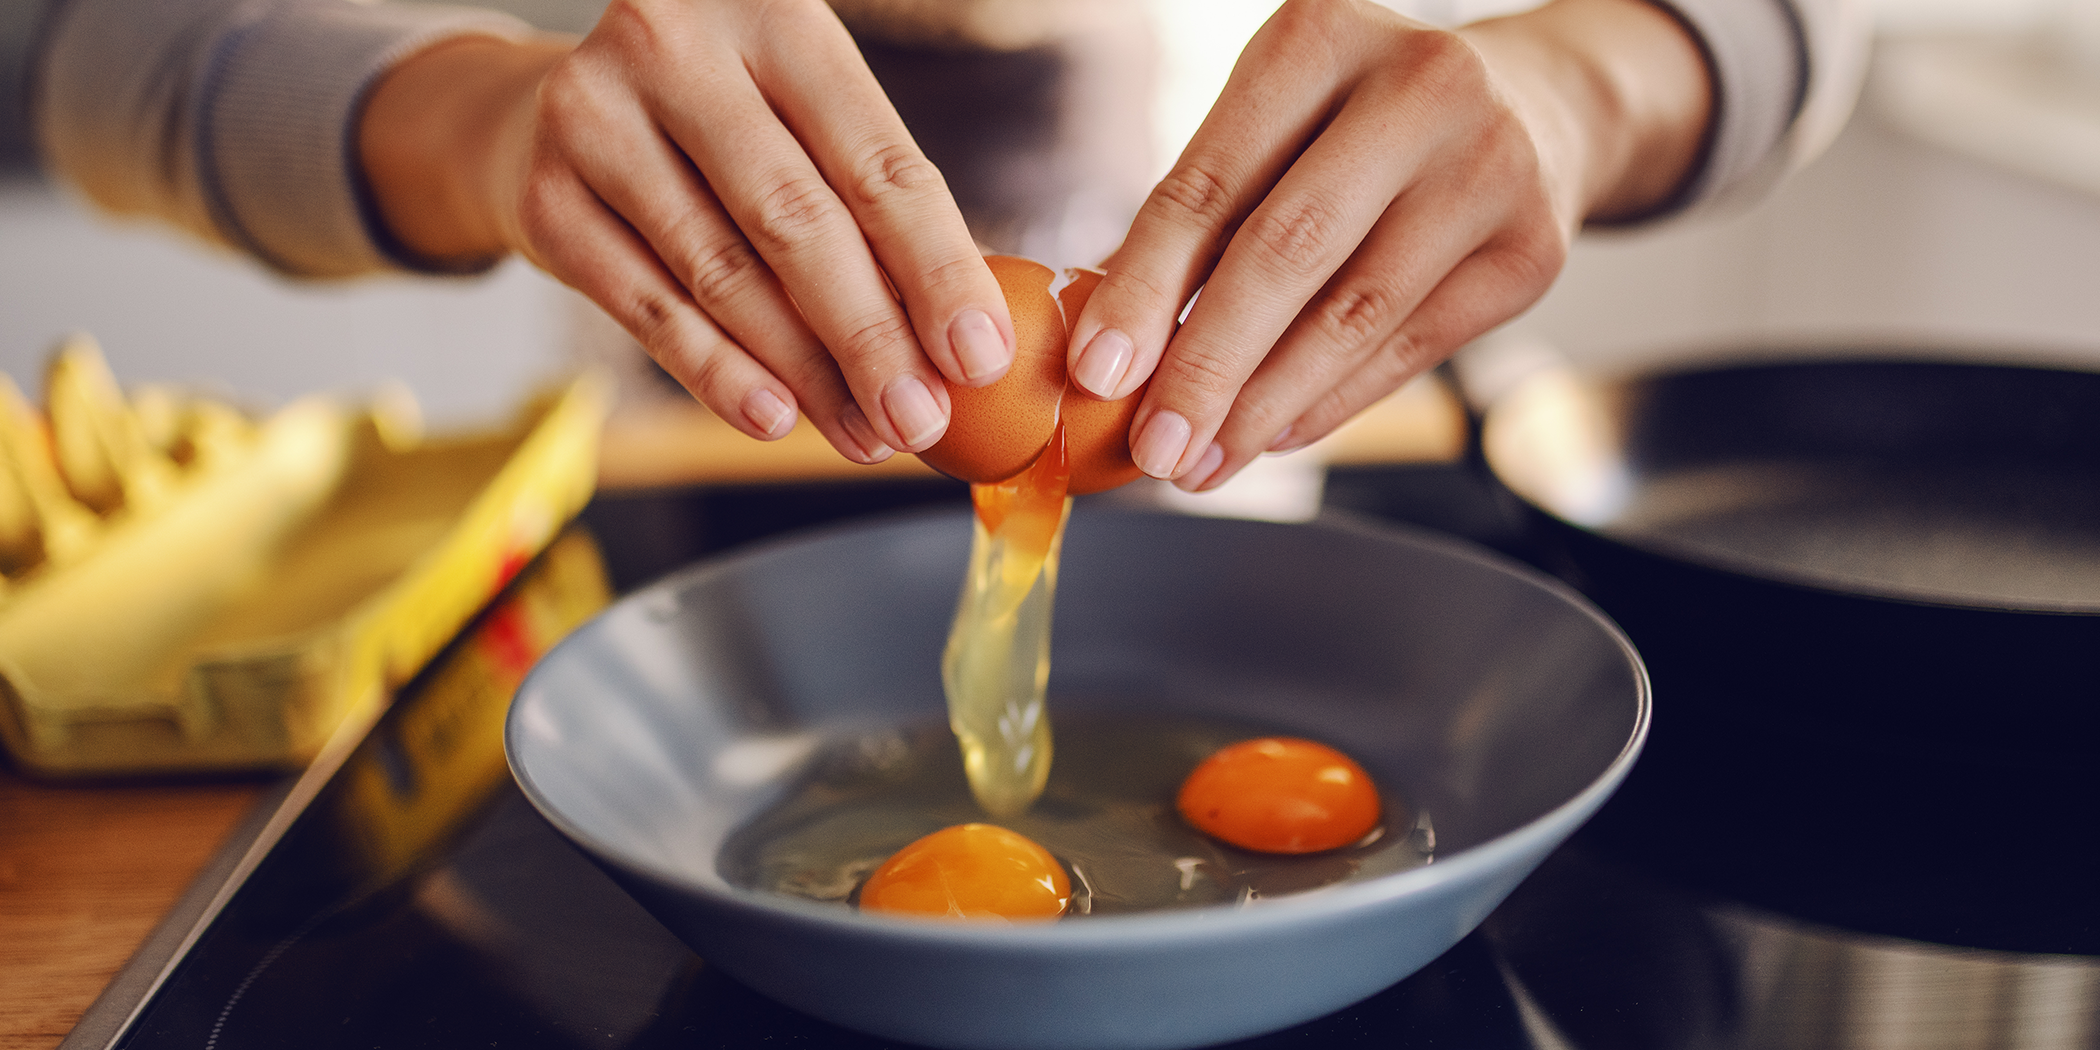 6 Reasons Why Eggs Are the Best For Your Health